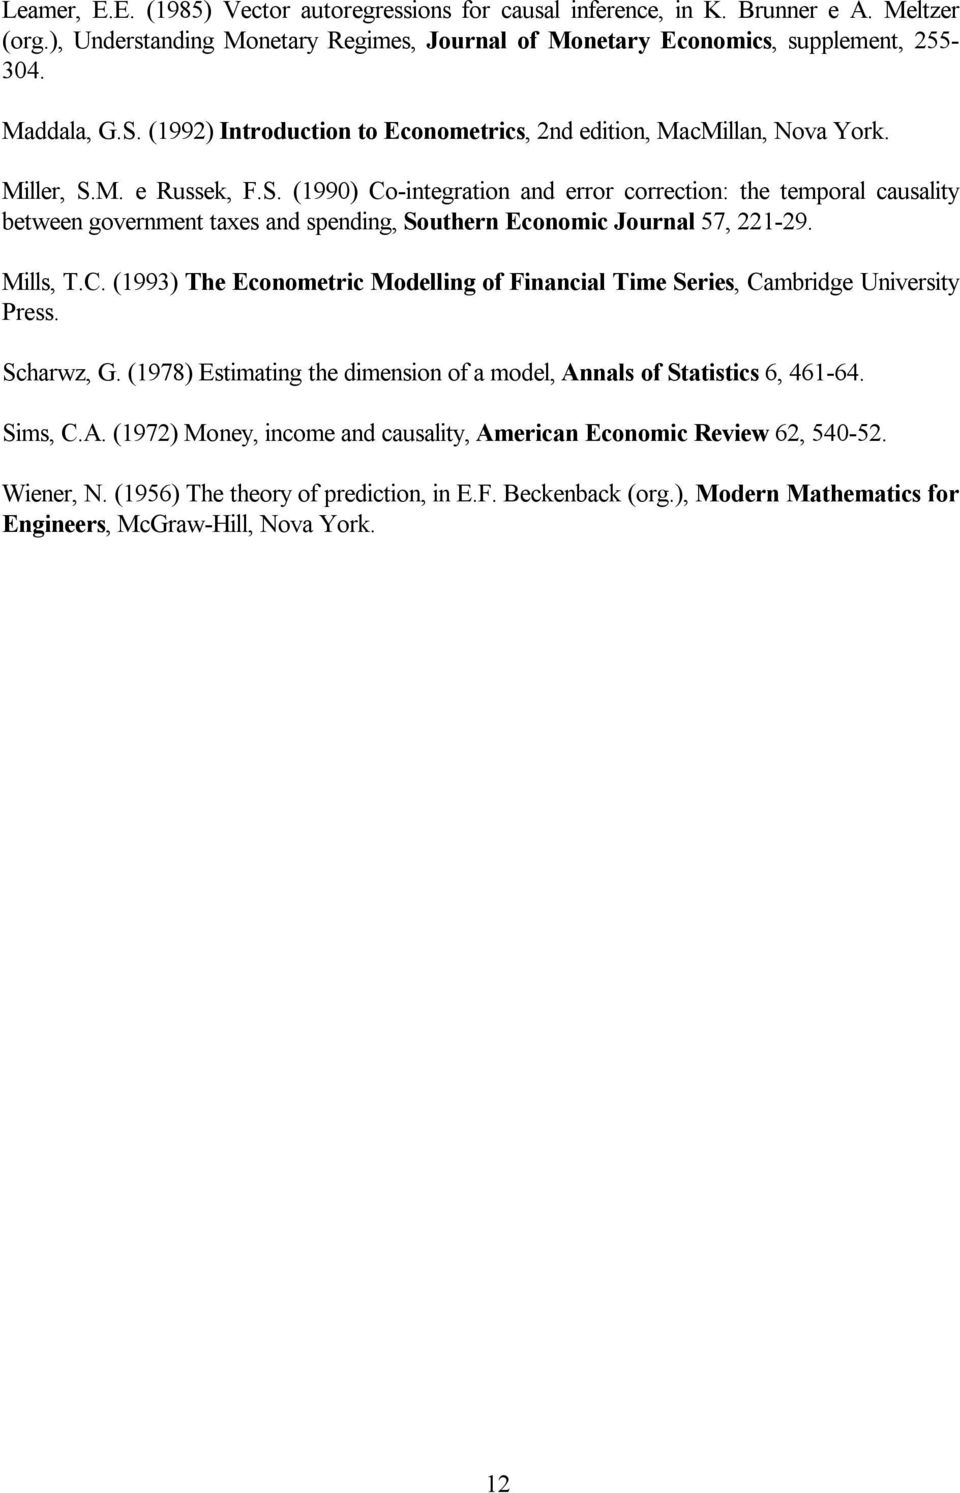 M. e Russek, F.S. (1990) Co-integration and error correction: the temporal causality between government taxes and spending, Southern Economic Journal 57, 221-29. Mills, T.C. (1993) The Econometric Modelling of Financial Time Series, Cambridge University Press.